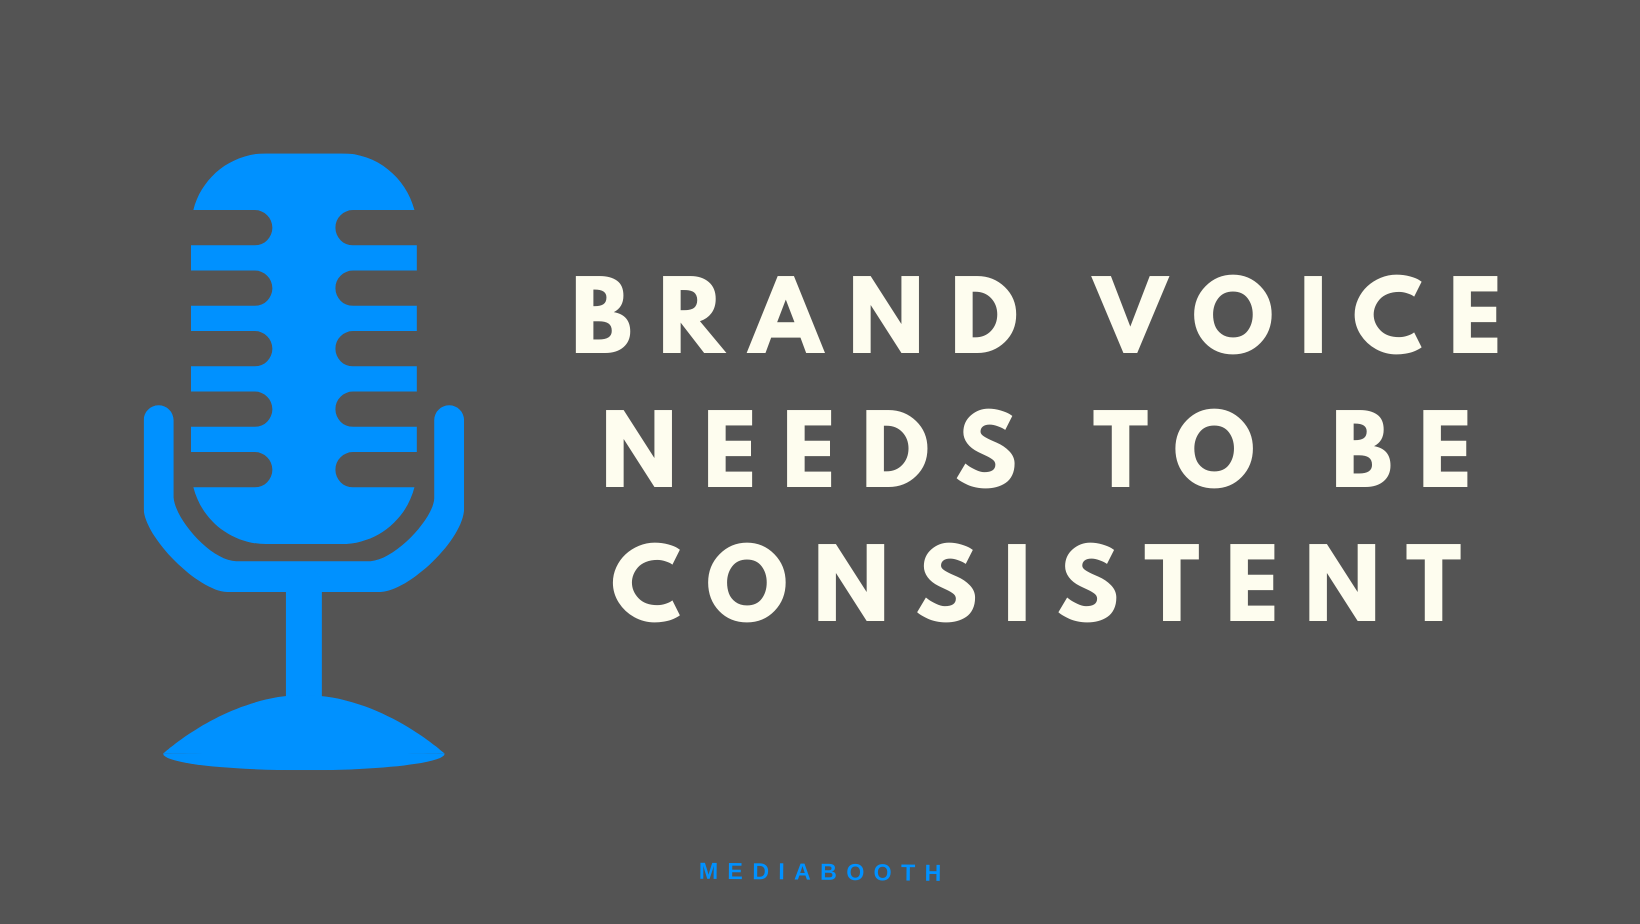 Find Your Brand Voice